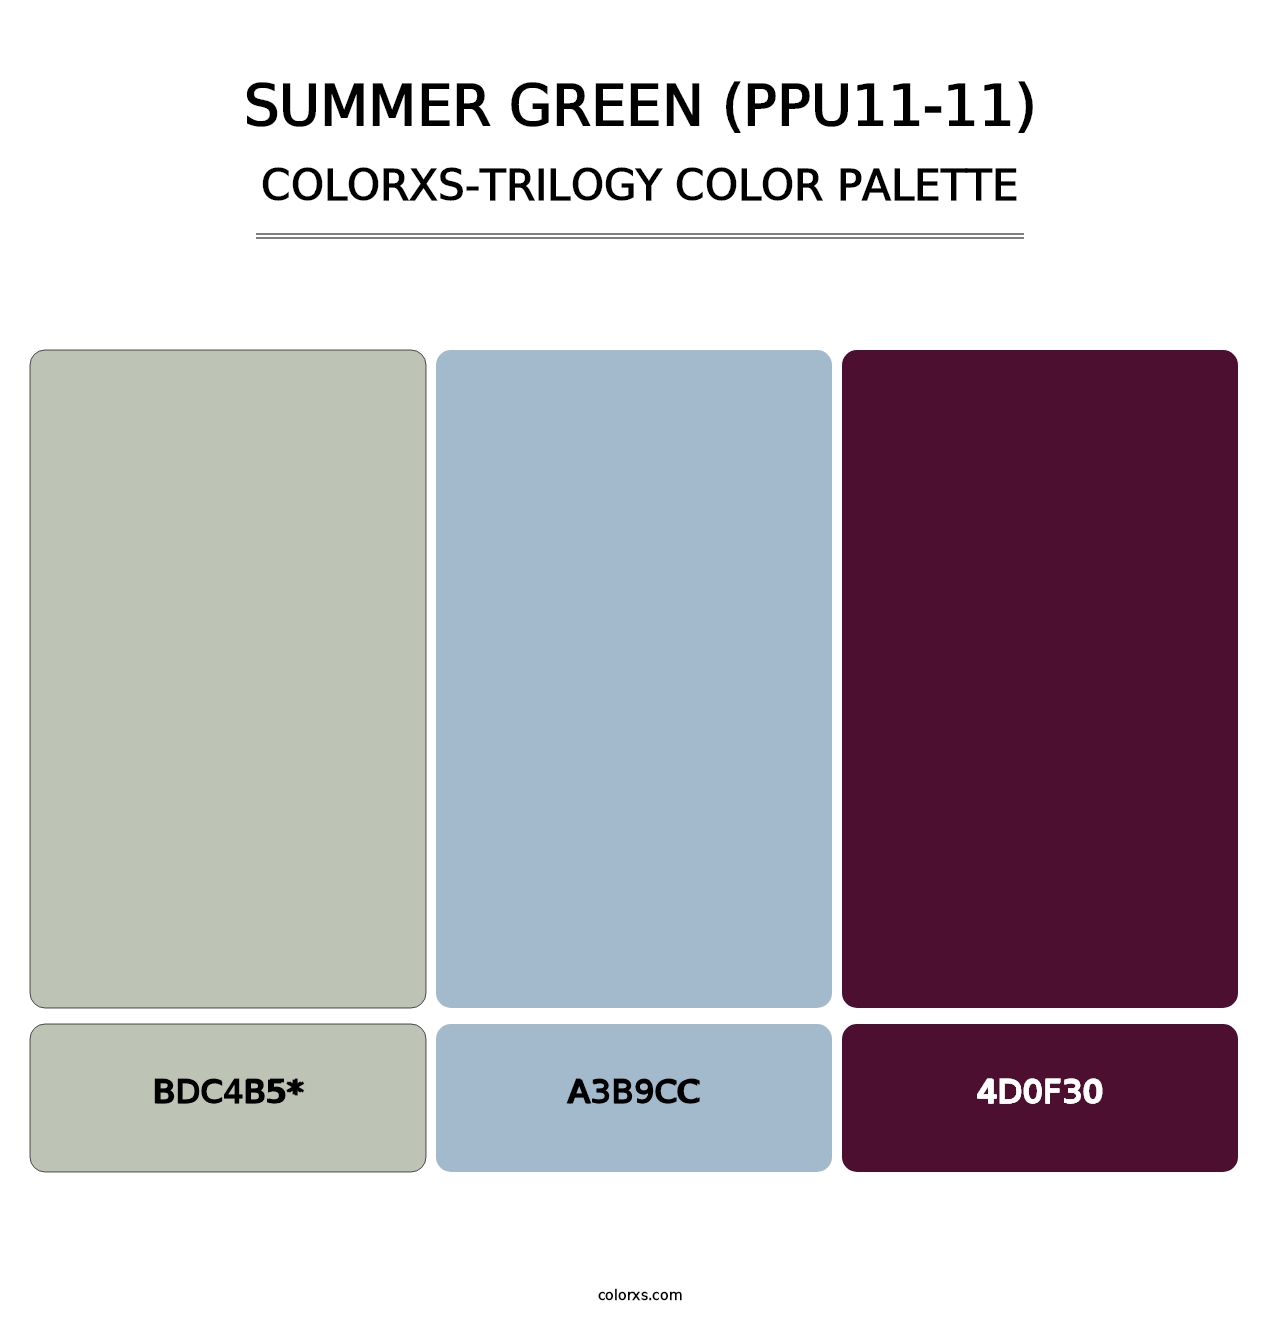 Summer Green (PPU11-11) - Colorxs Trilogy Palette